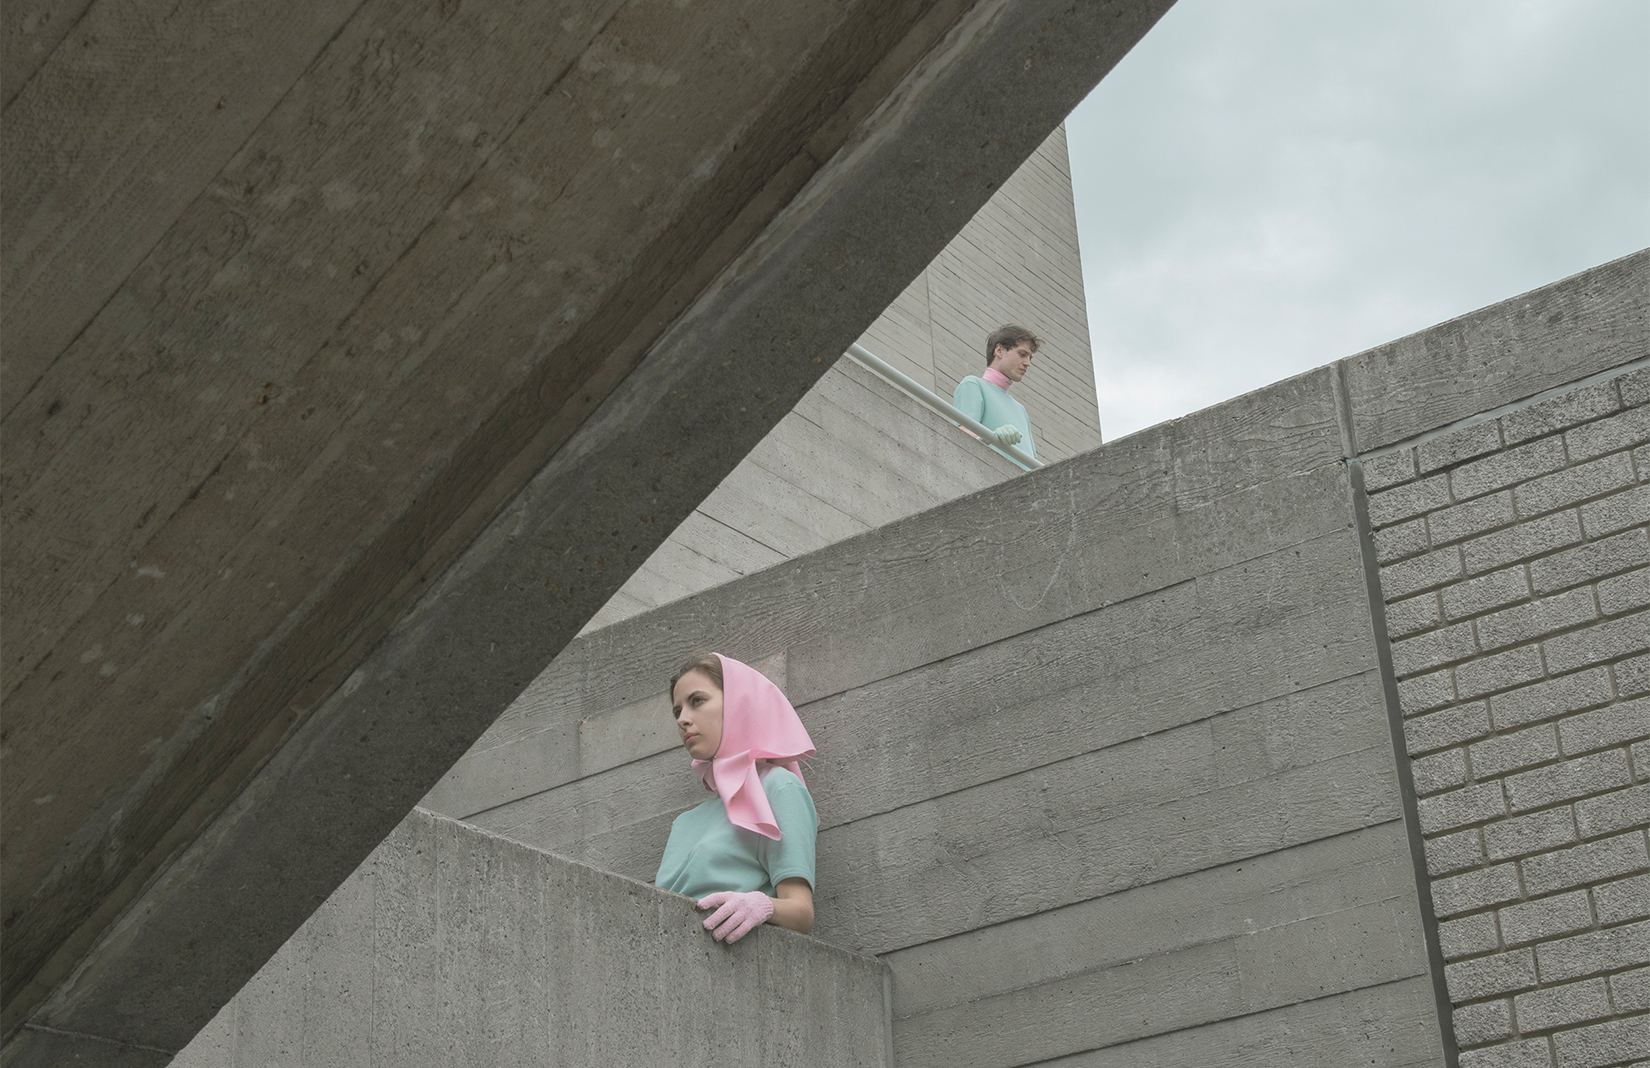 Concrete is given a Wes Anderson spin by photographer Marietta Varga